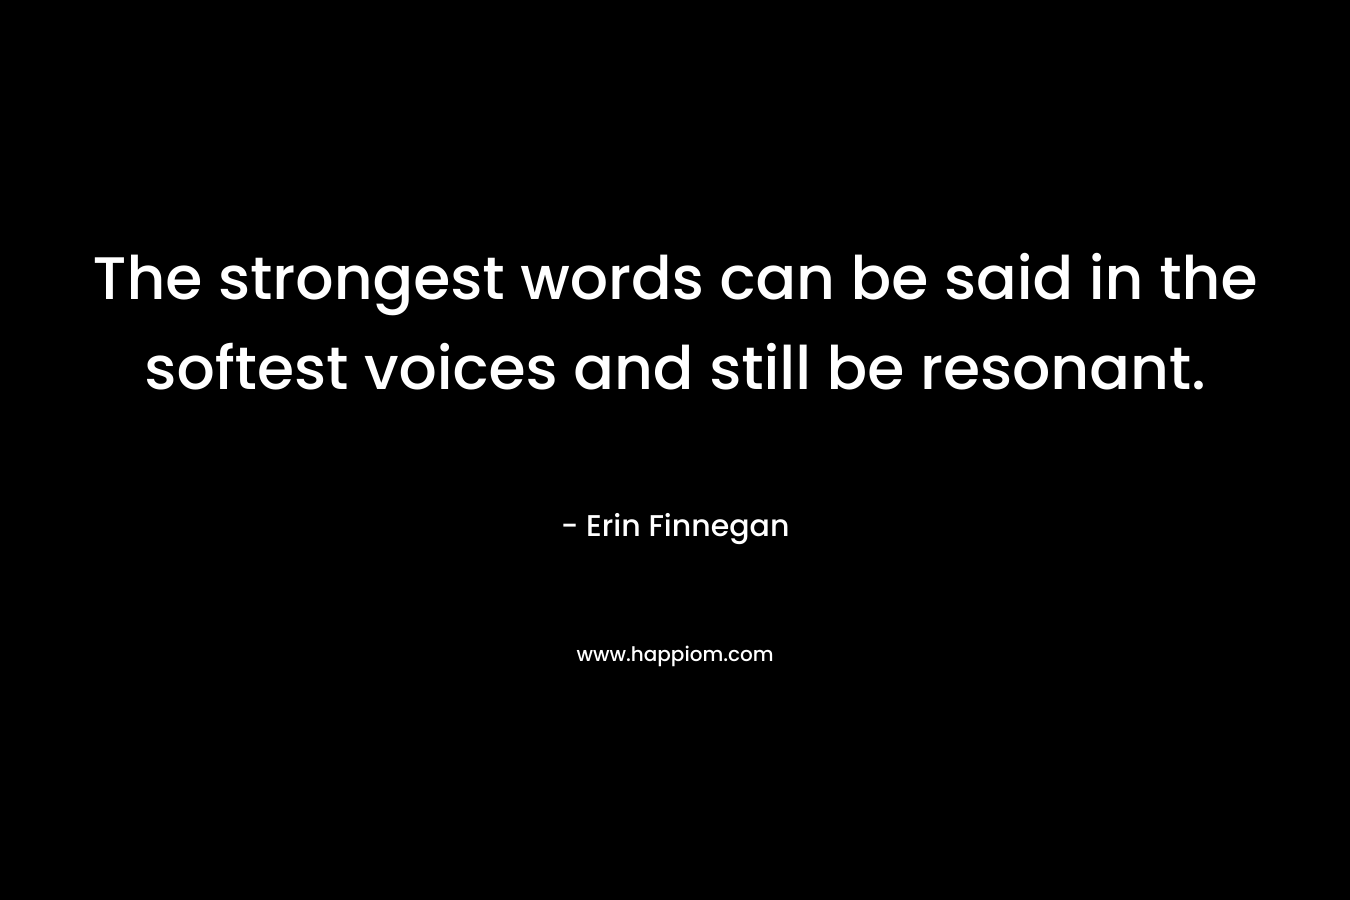 The strongest words can be said in the softest voices and still be resonant. – Erin Finnegan